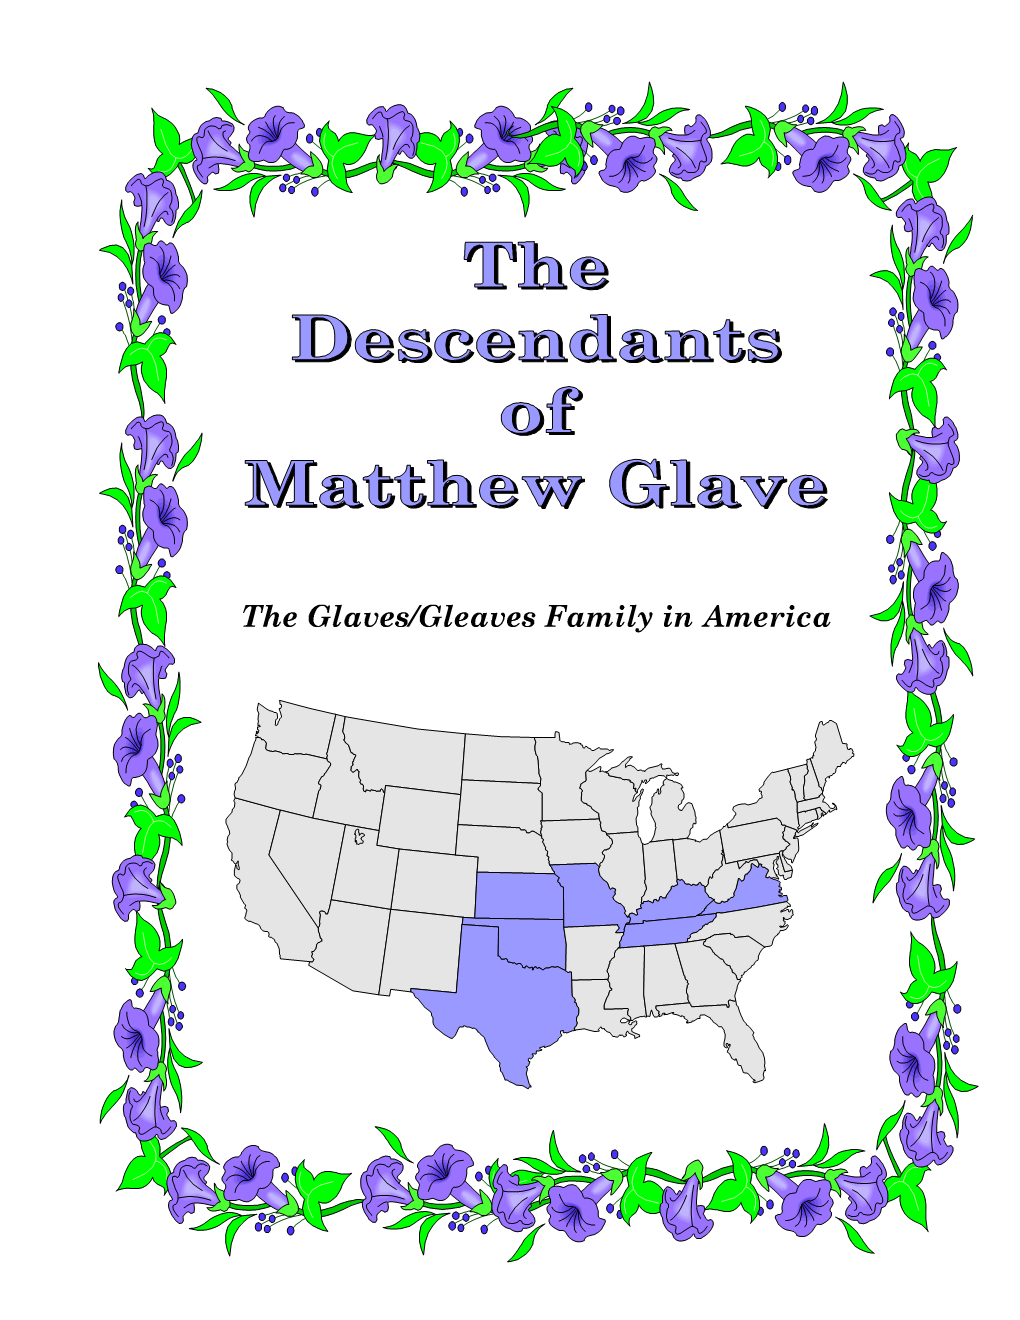 This Document Is the Product of Years of Research Into the Story of the Glaves/Gleaves